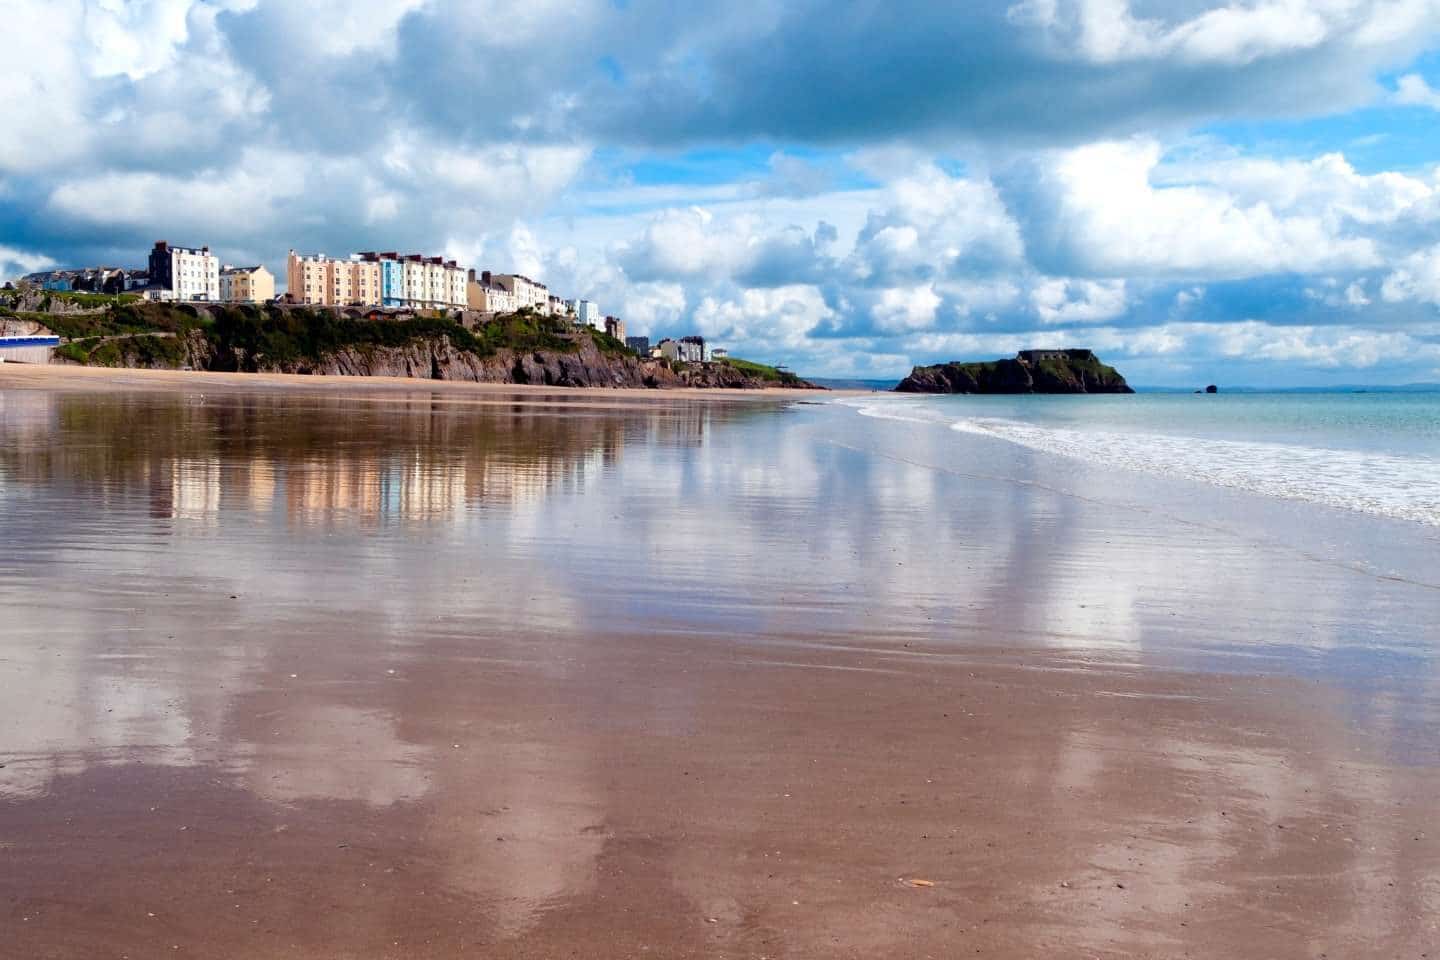 reflected in wet sand in south beach tenby